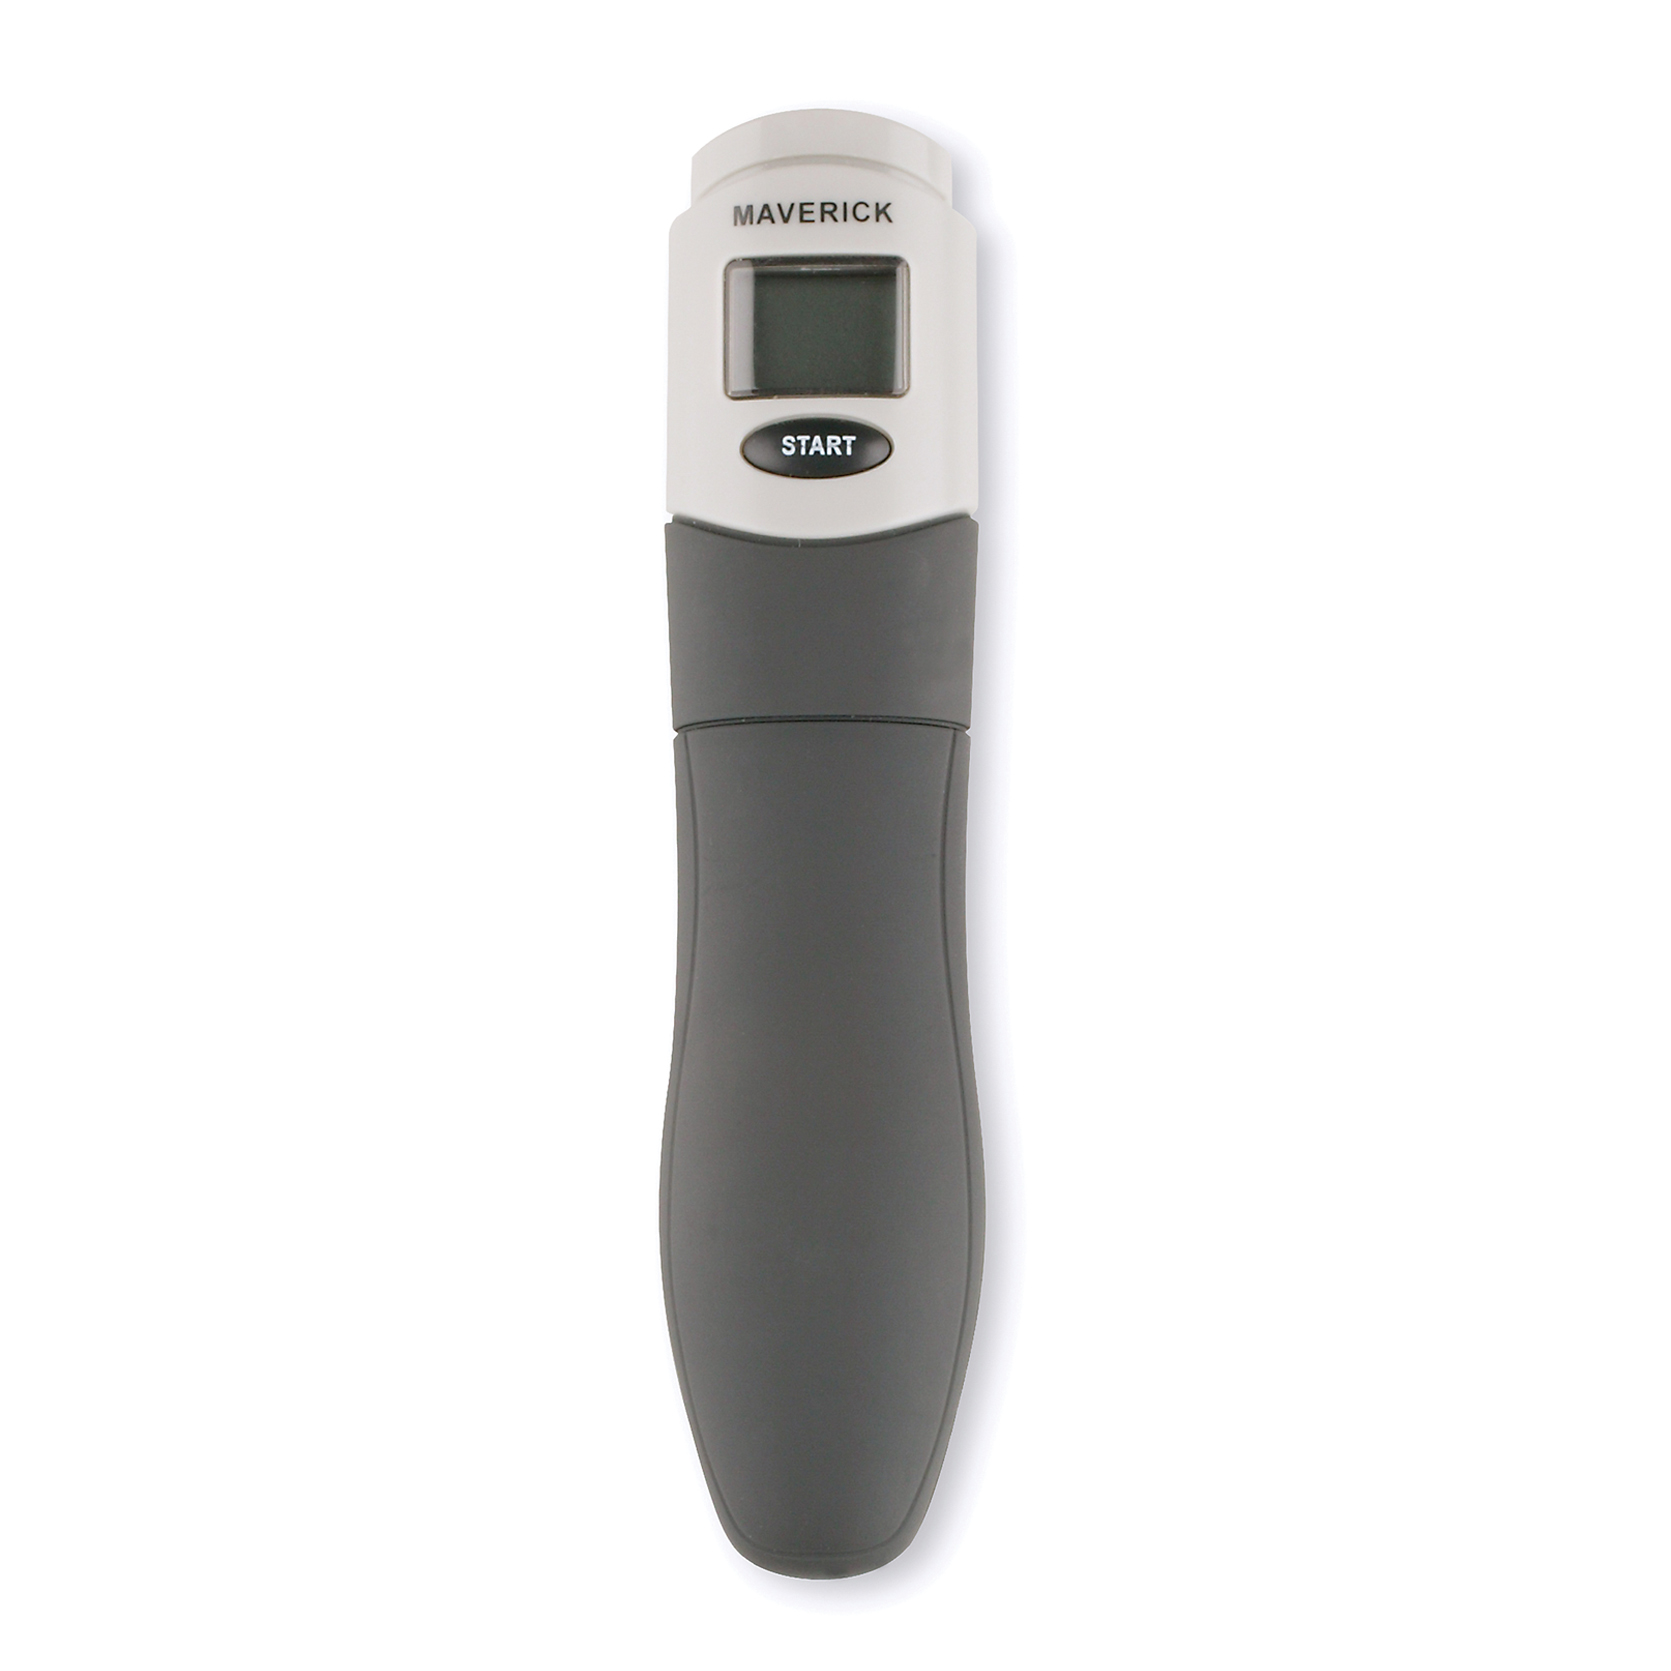 https://www.maverickthermometers.com/wp-content/uploads/2021/05/DT-12C_2_product.jpg